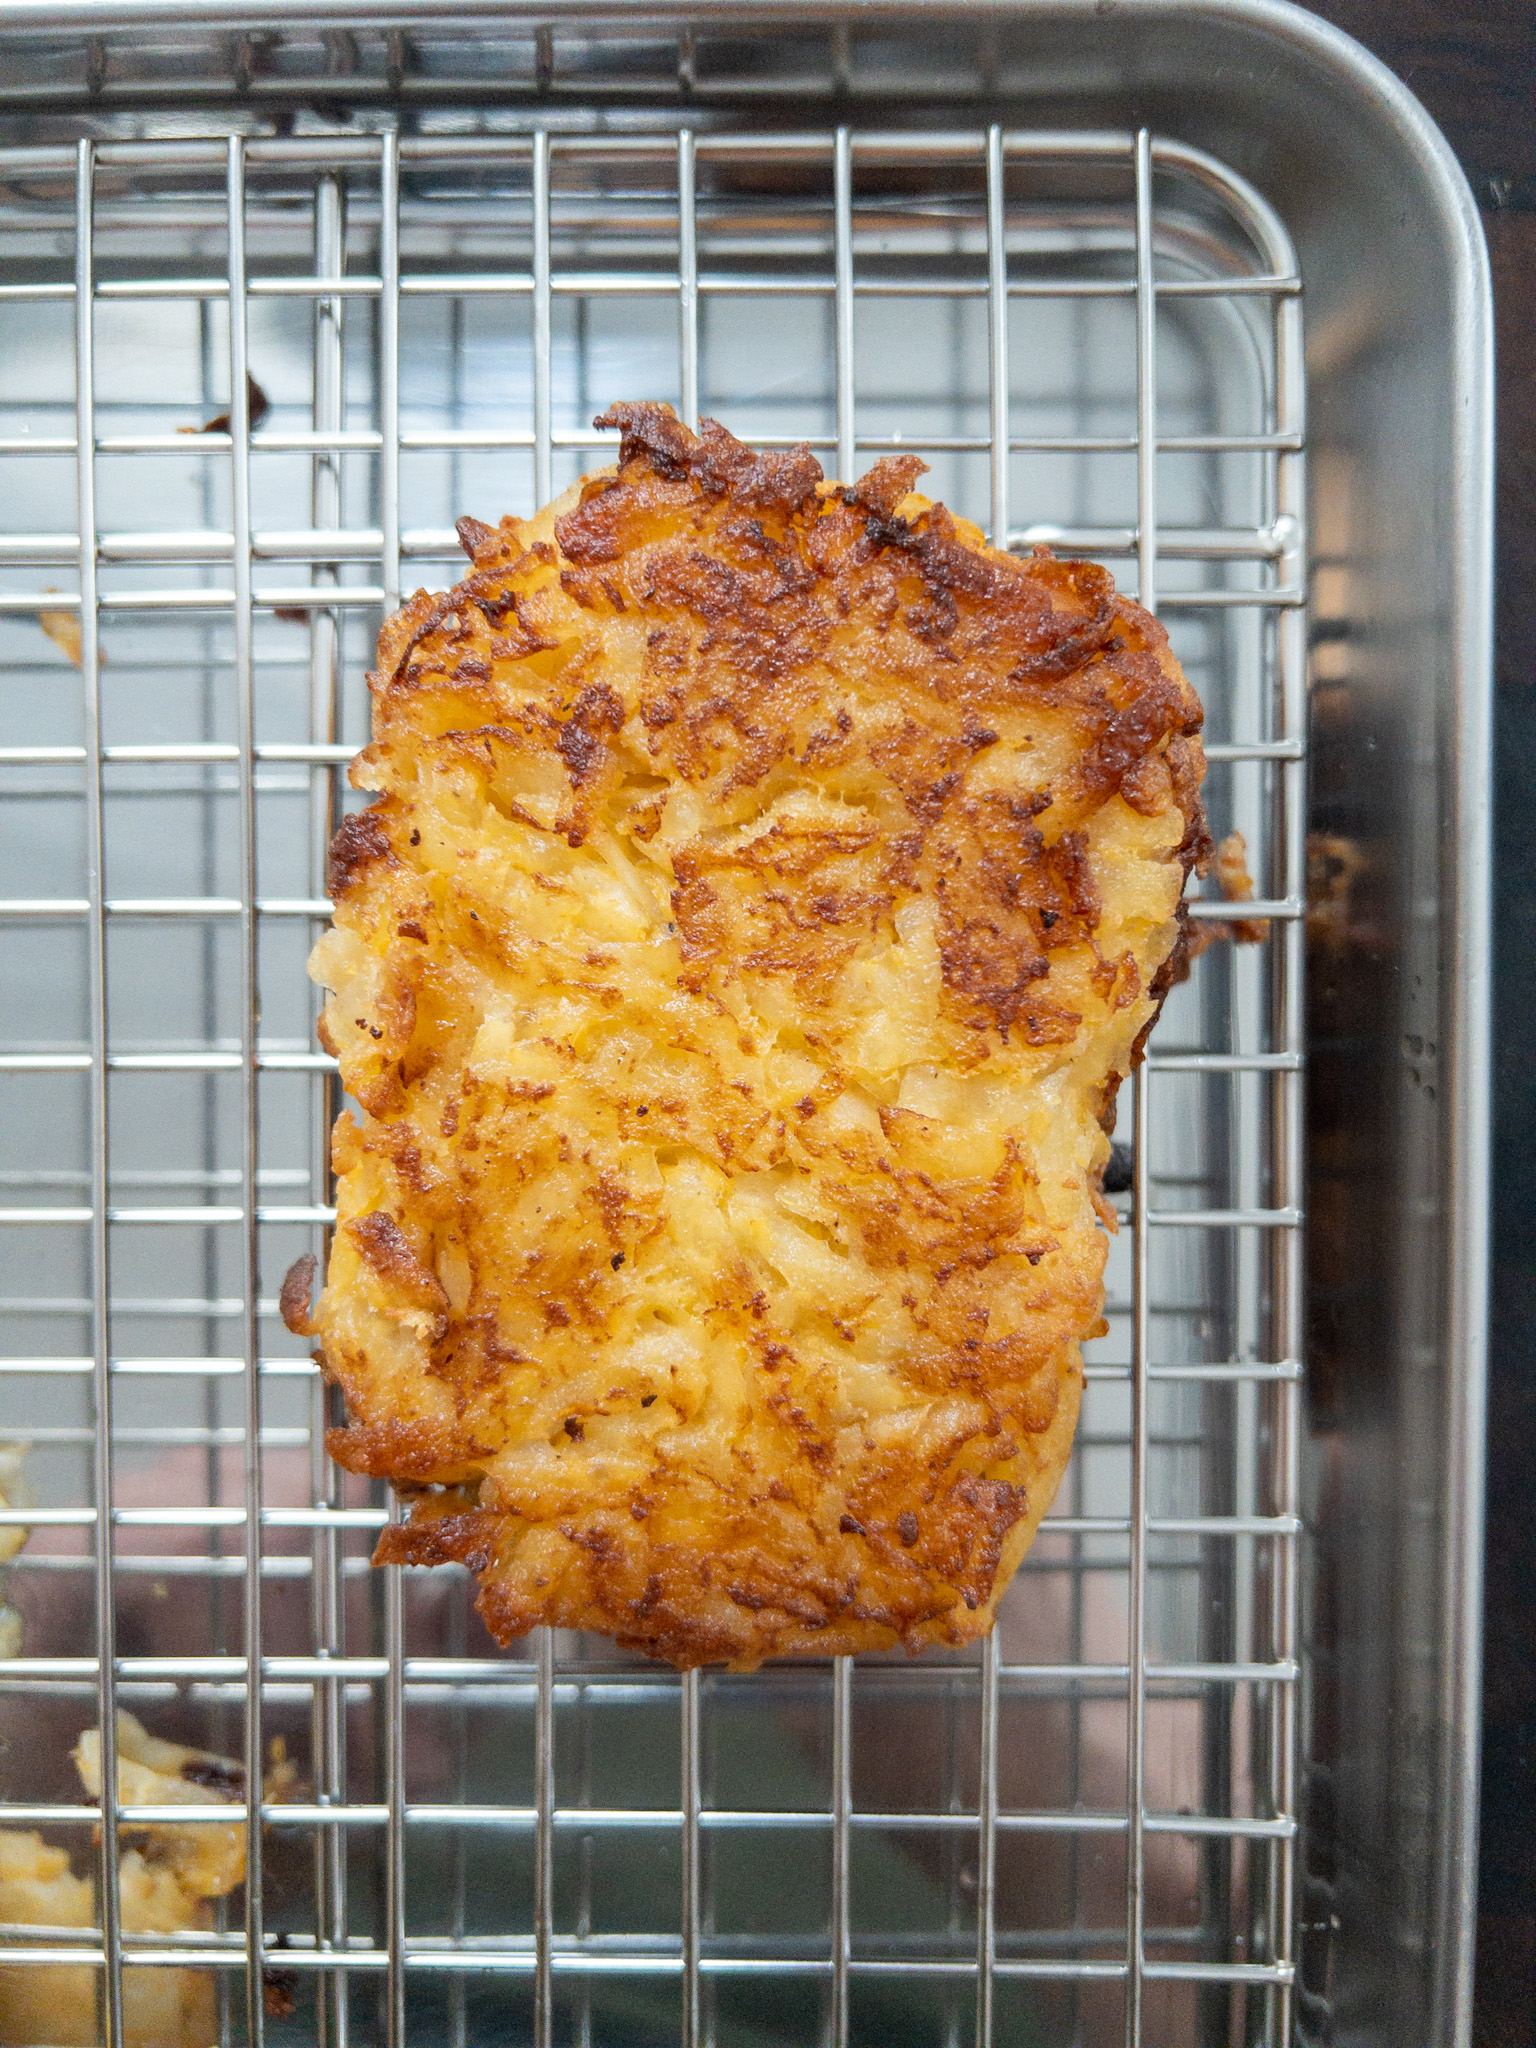 Overhead shot of a home made hash brown on a wire rack